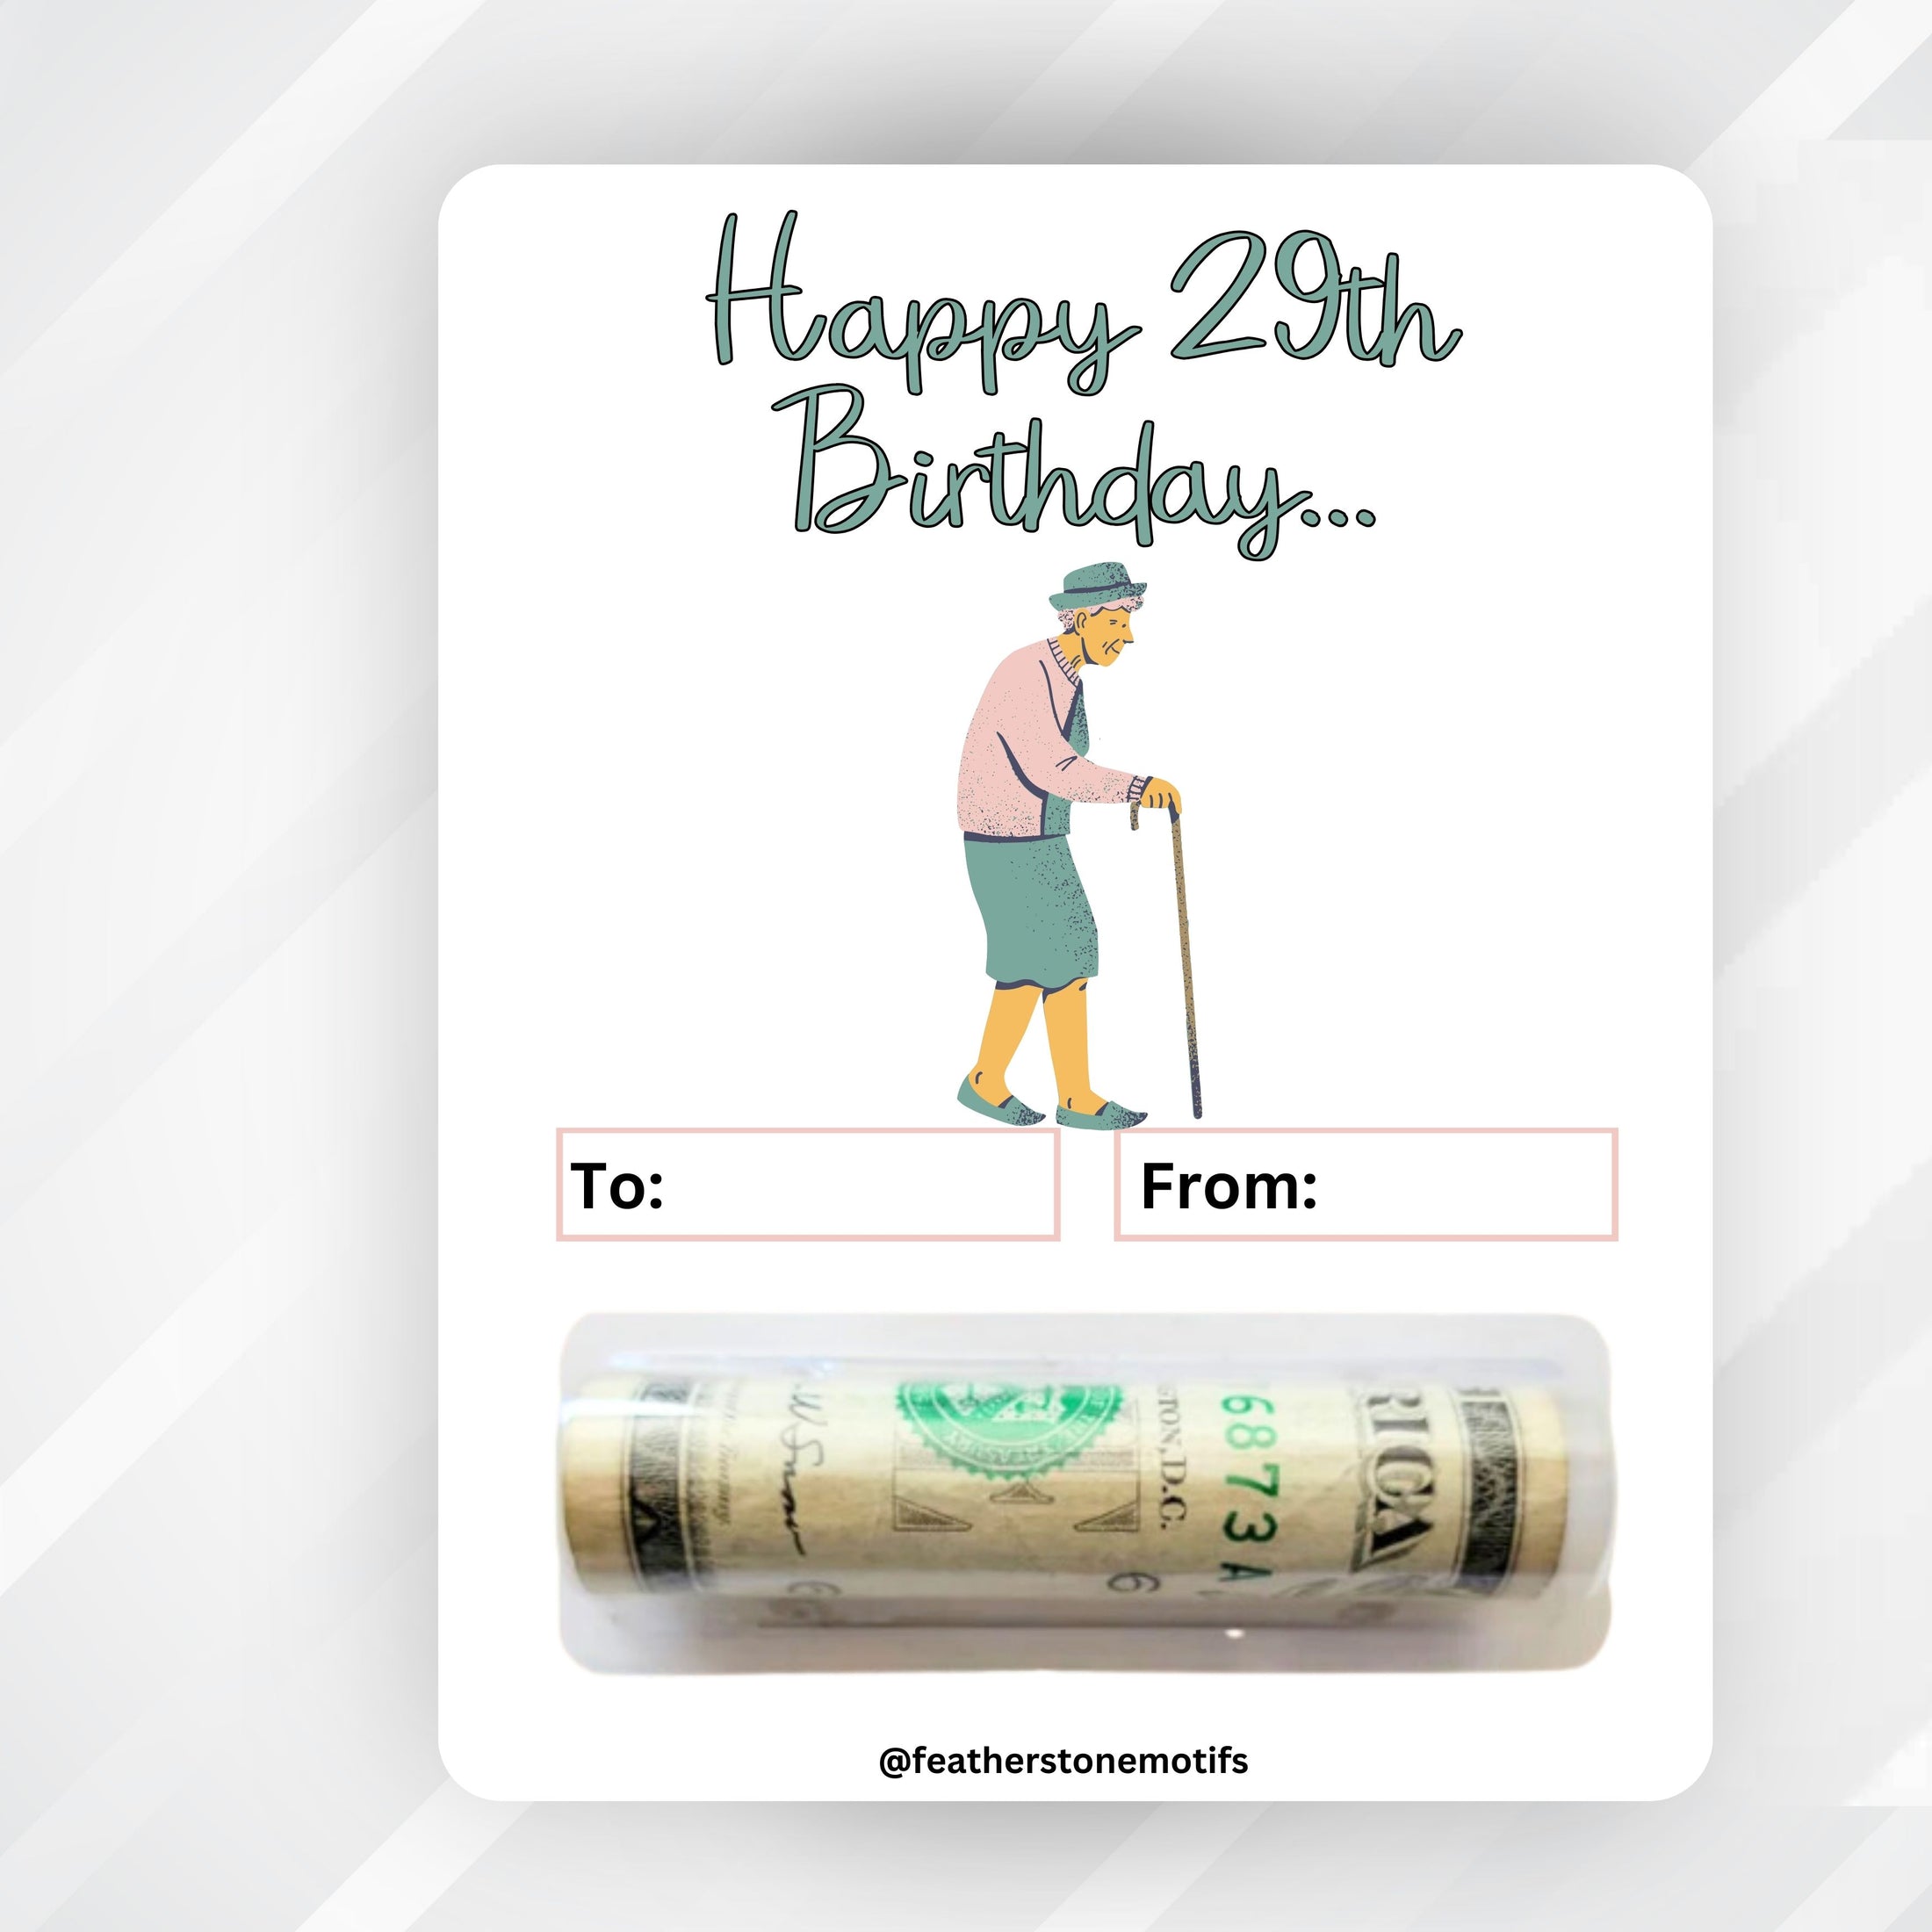 This image shows the money tube attached to the 29th Birthday Money Card.